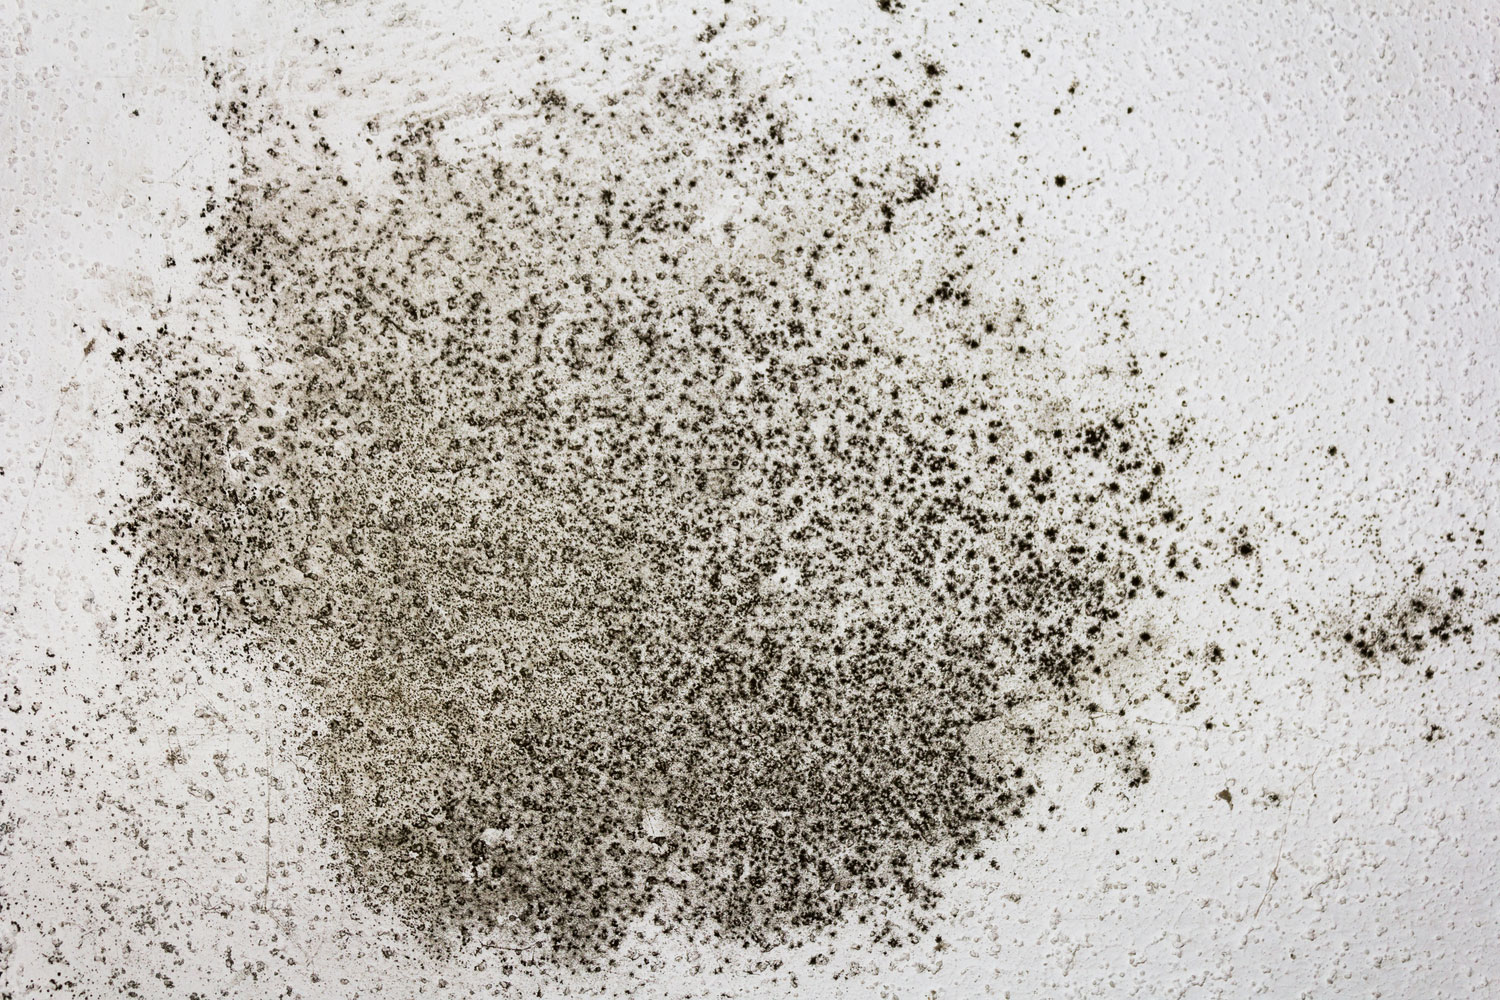 Black Mold: Symptoms, Testing, Removal and Prevention